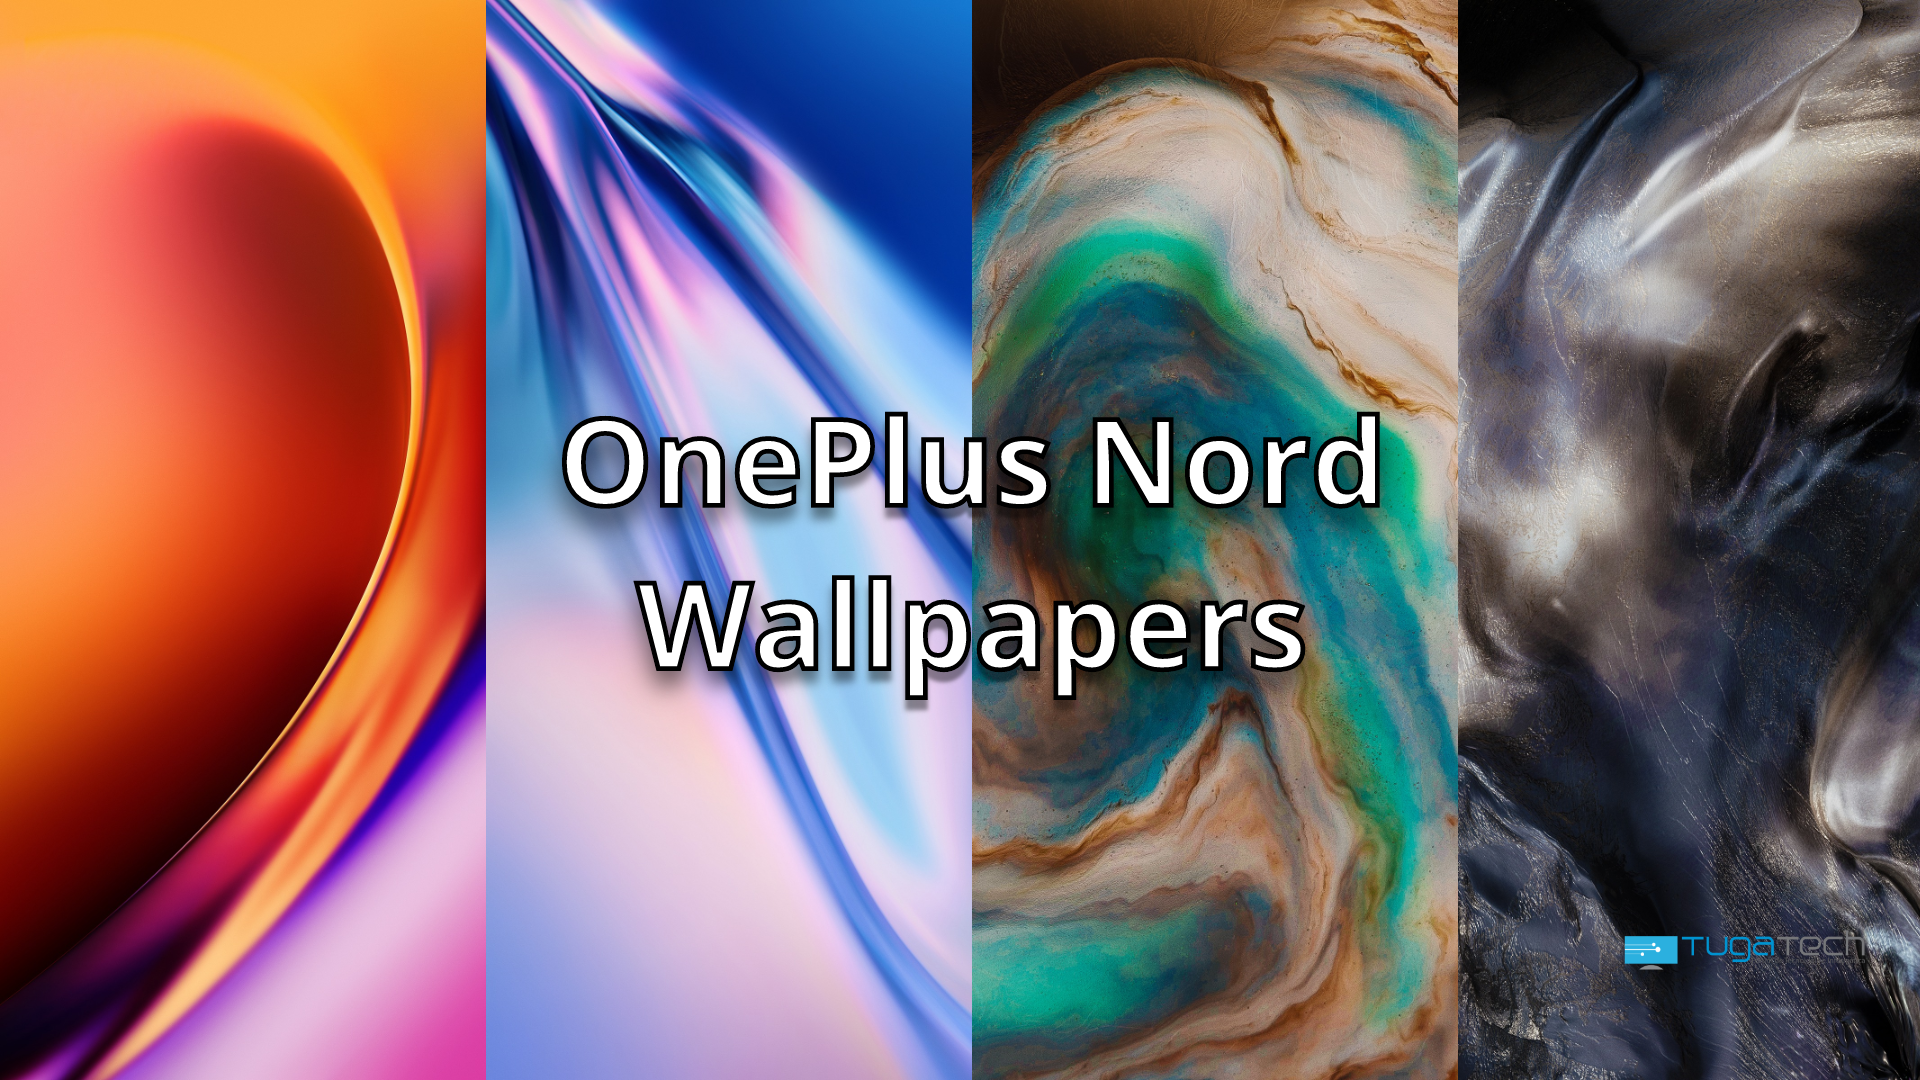 OnePlus Nord Wallpapers